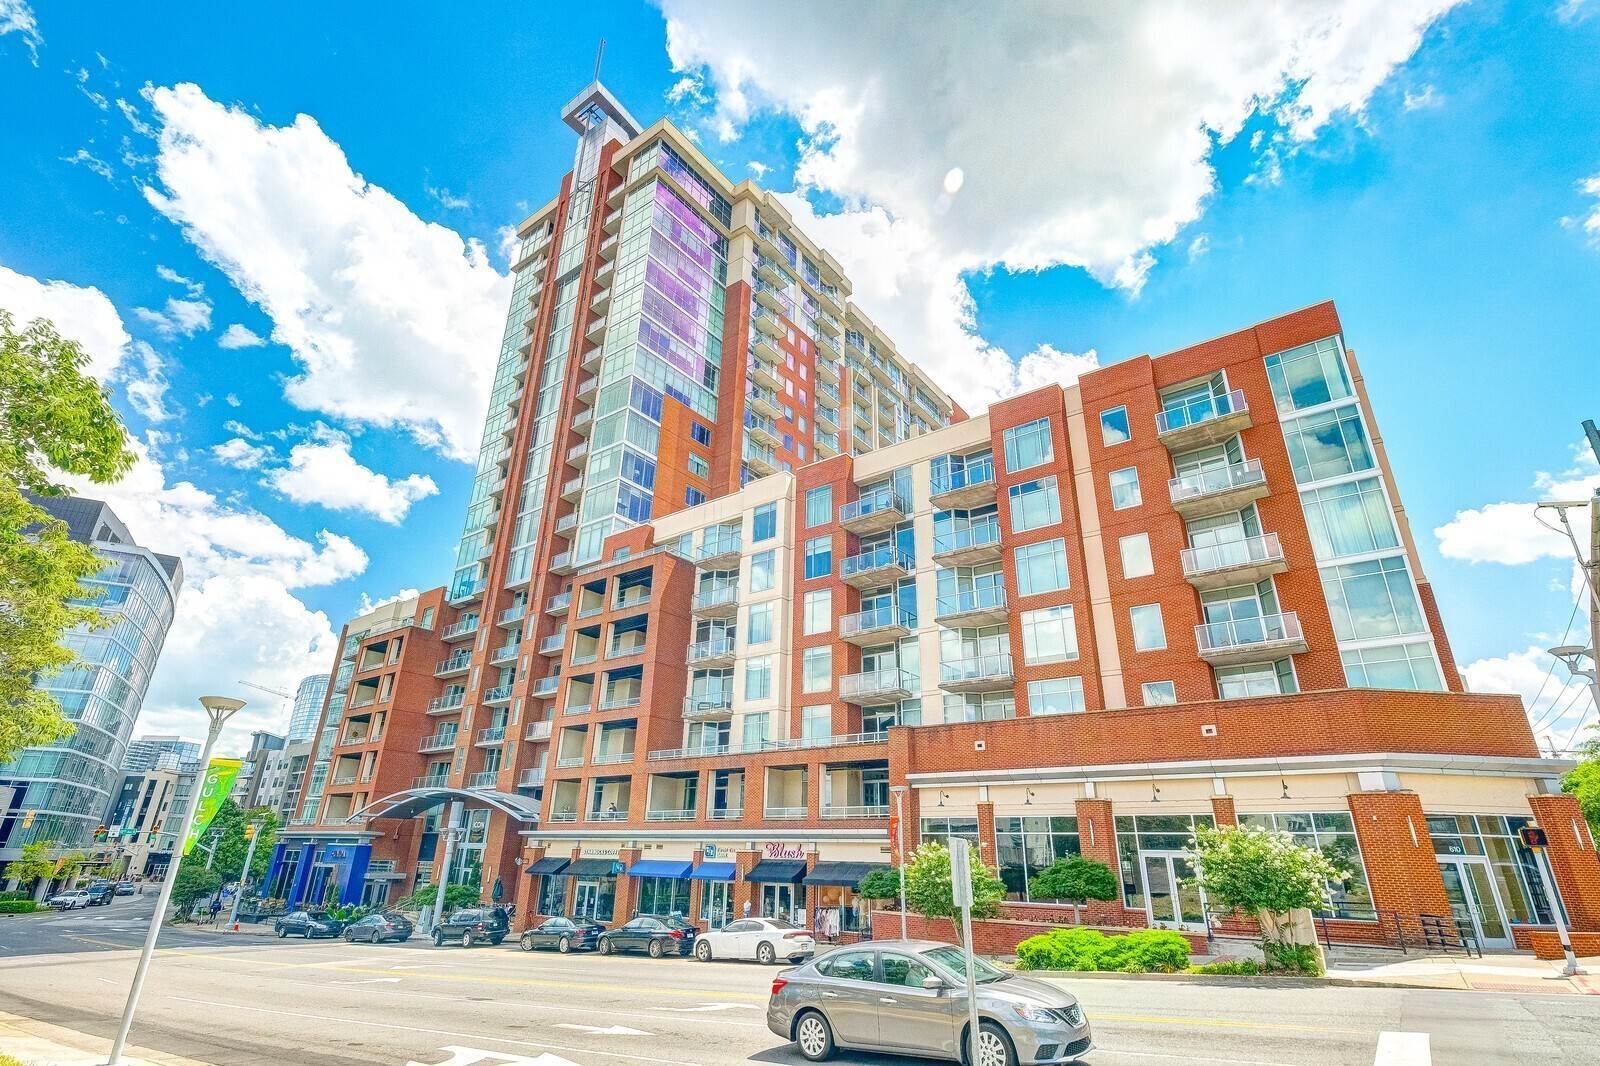 20. High Rise for Sale at 600 12th Ave, S Nashville, Tennessee 37203 United States